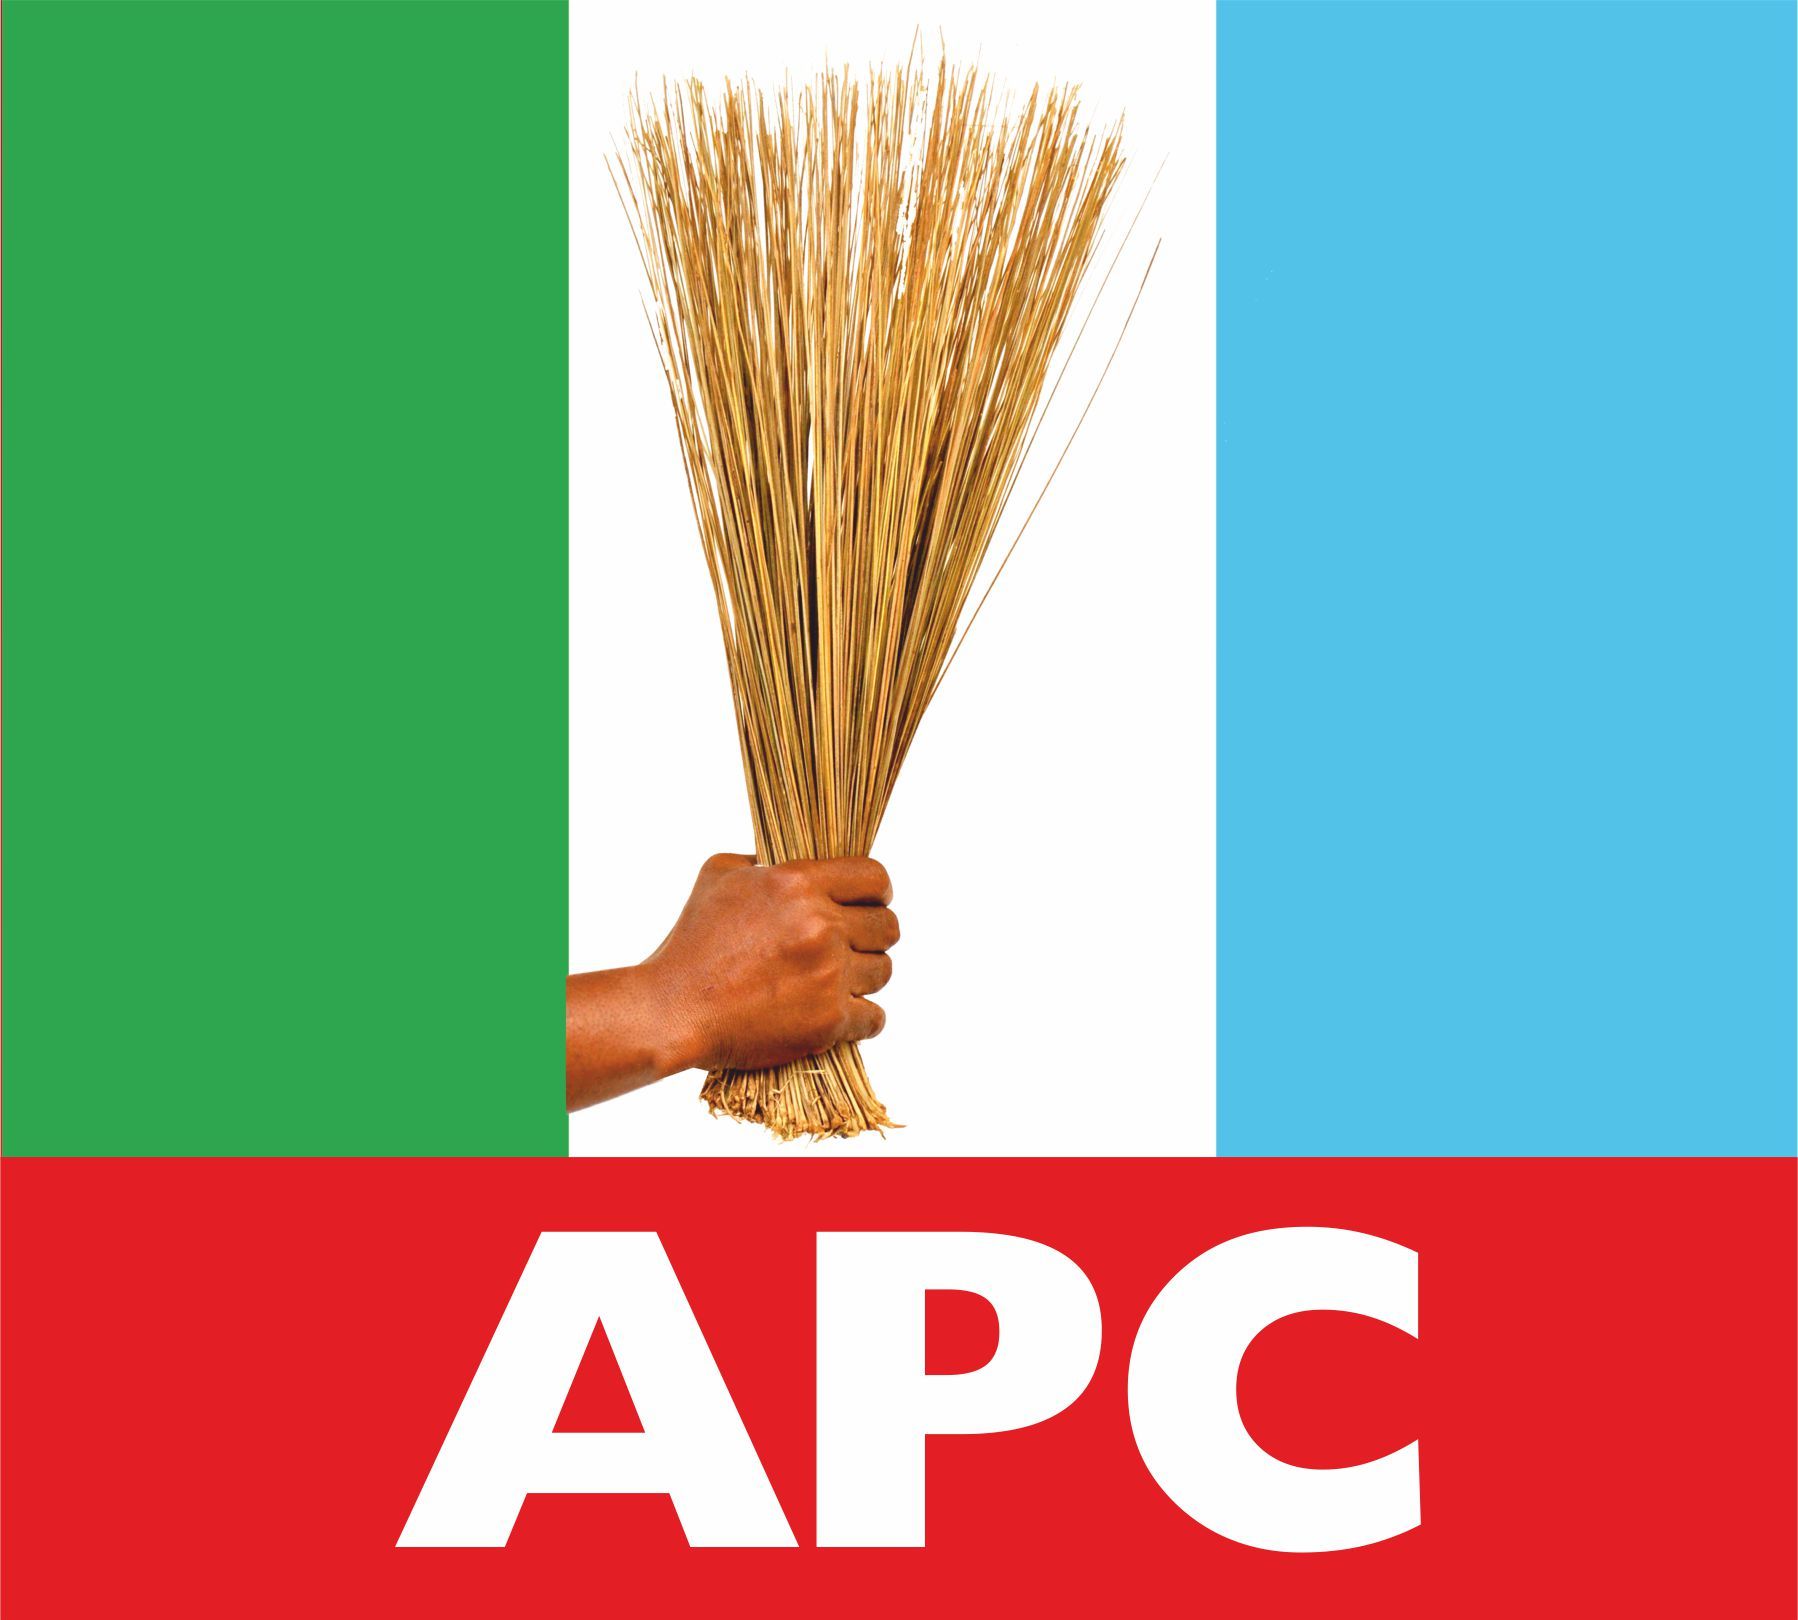 We have hitch free revalidation, registration exercise - says APC in Kebbi